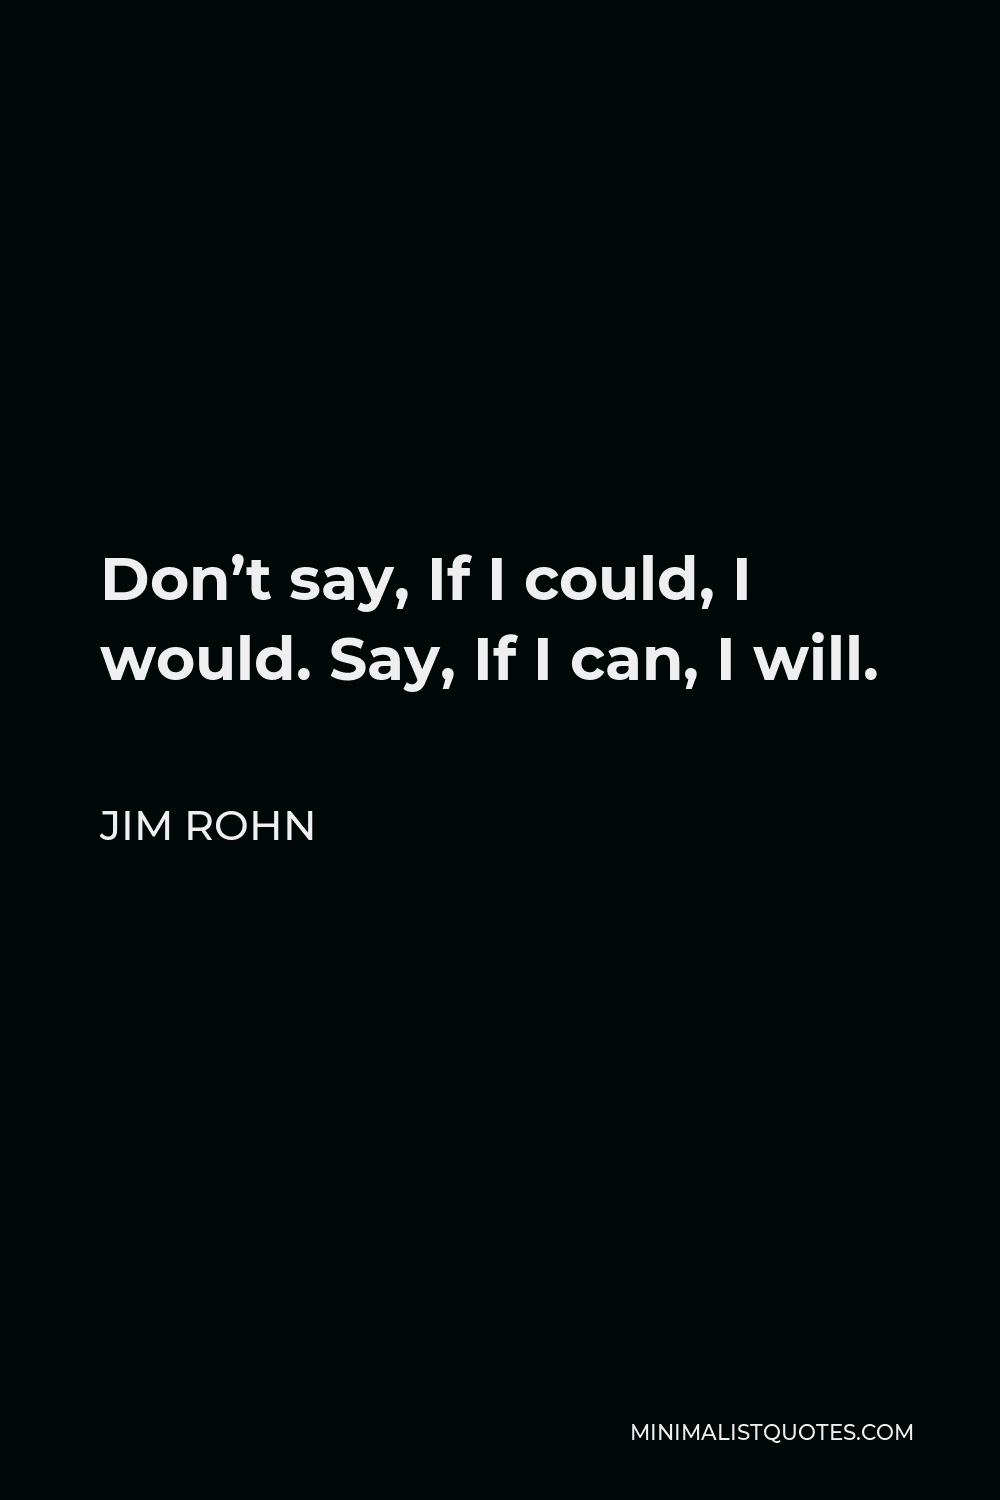 Jim Rohn Quote - Don’t say, If I could, I would. Say, If I can, I will.